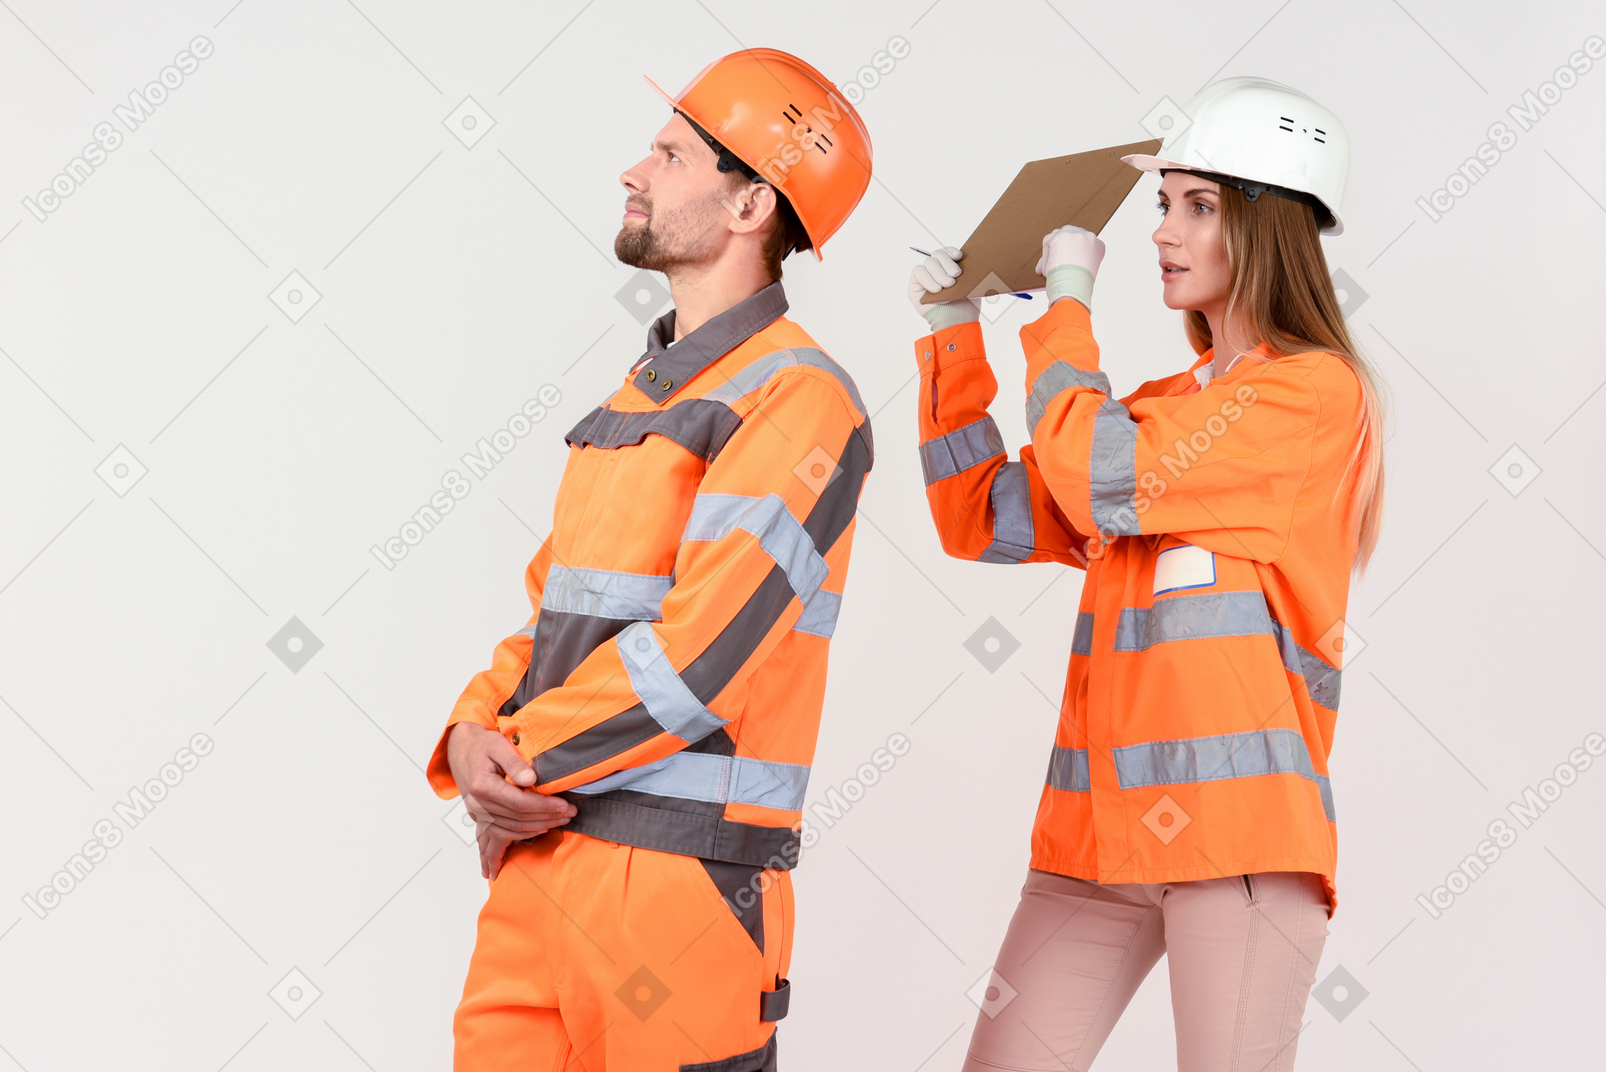 Female street worker is going to hit male street worker with file